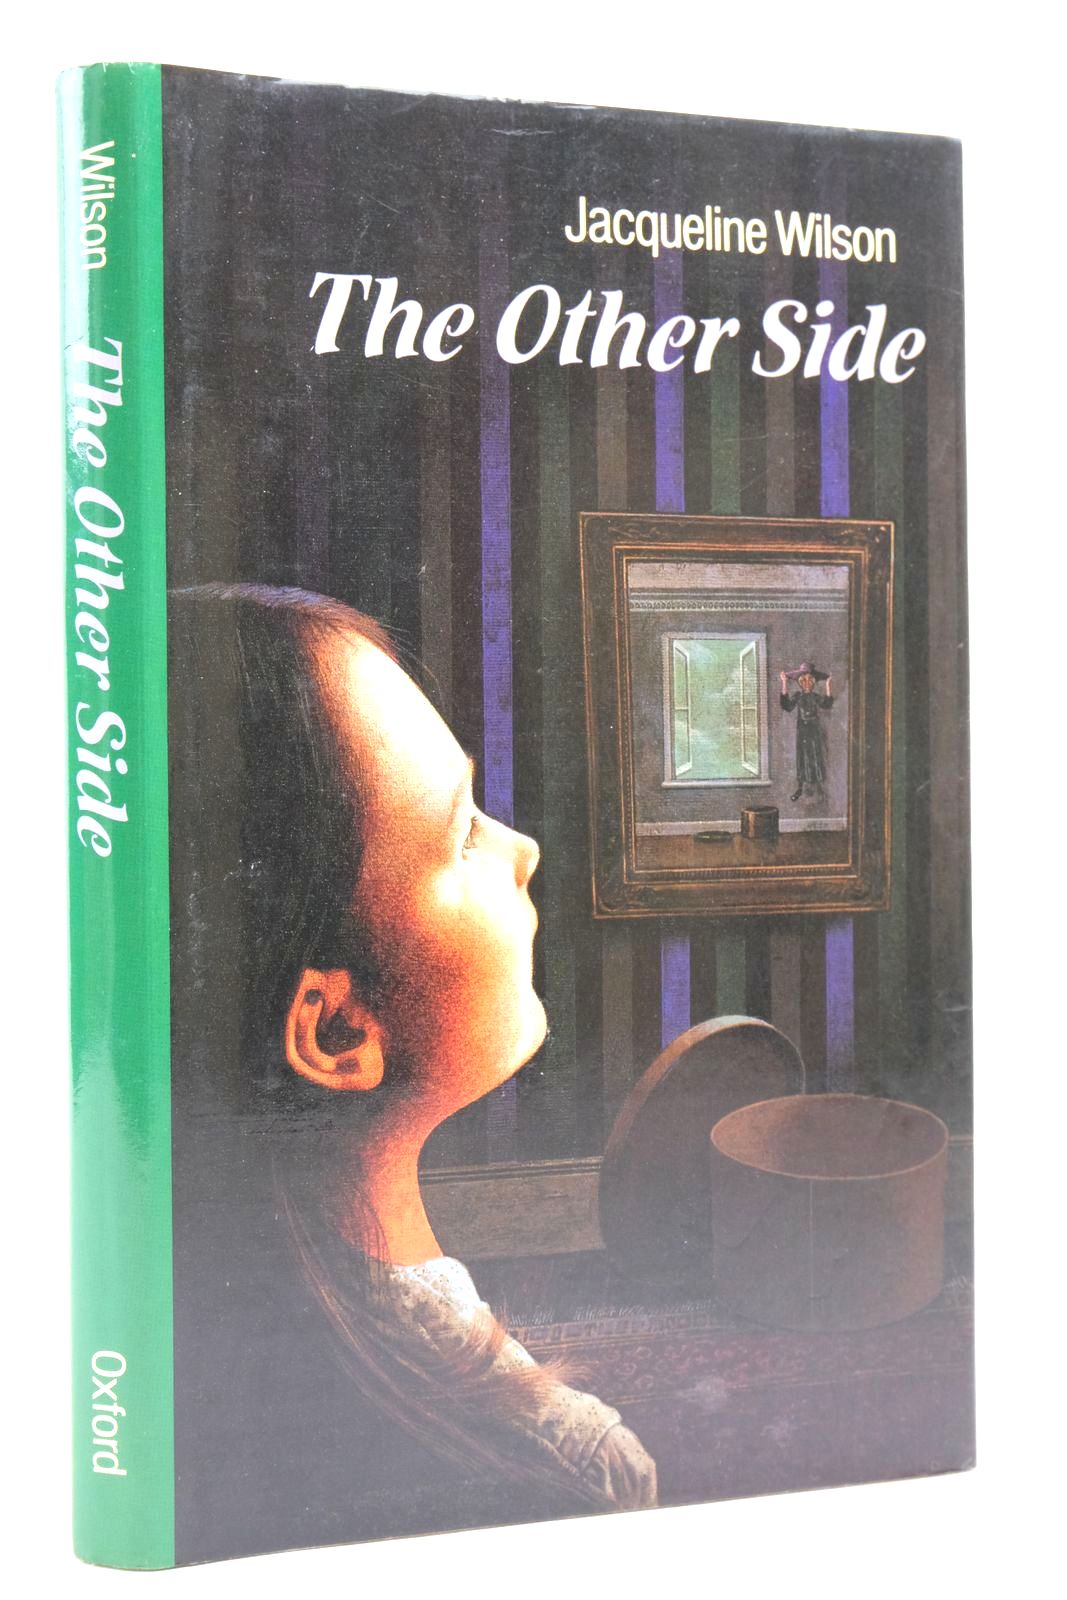 Photo of THE OTHER SIDE written by Wilson, Jacqueline published by Oxford University Press (STOCK CODE: 2137458)  for sale by Stella & Rose's Books